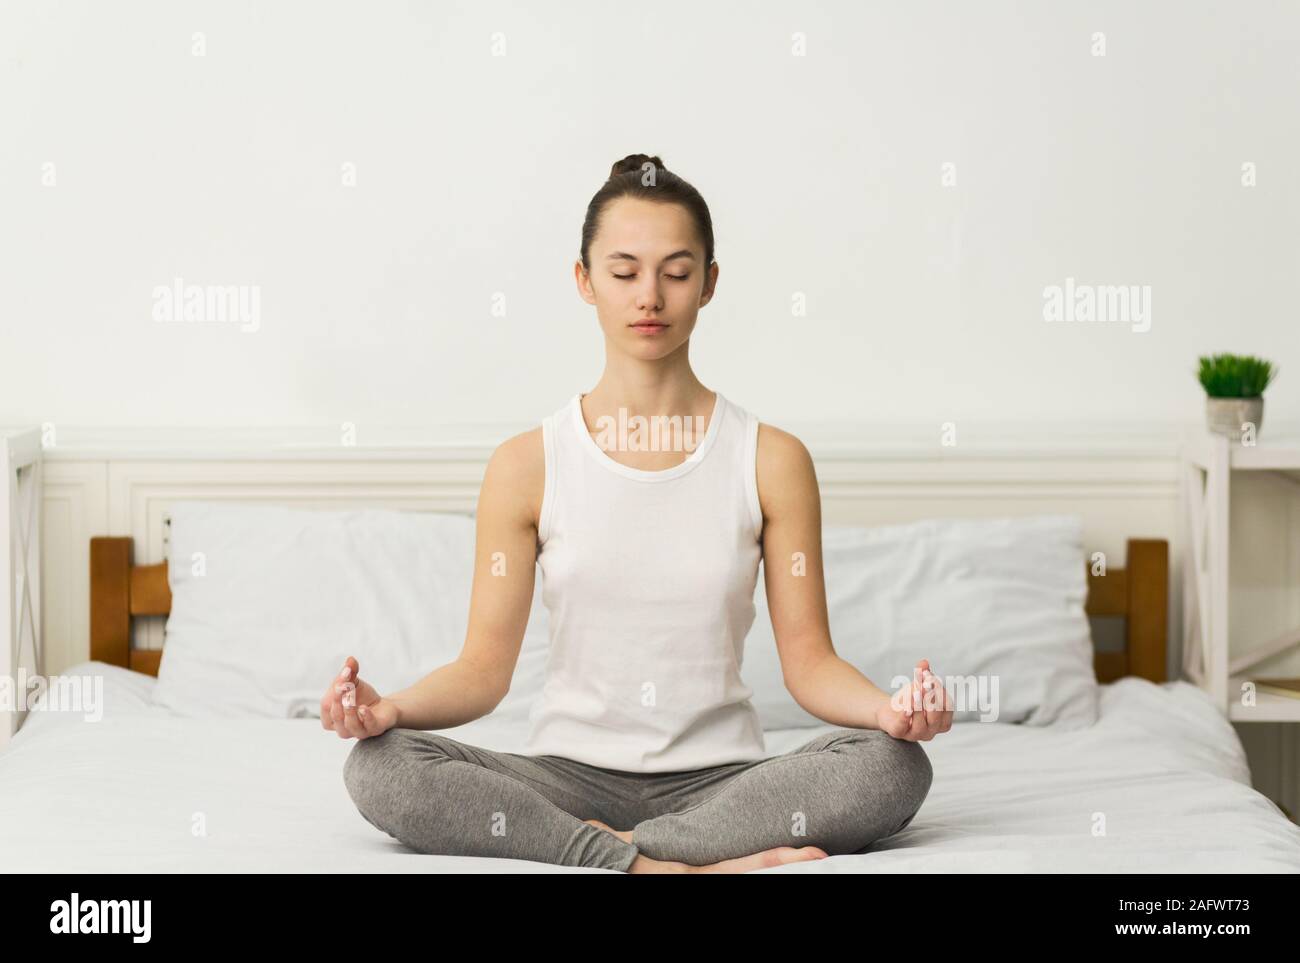 Meditation. Millennial woman sitting in lotus position on bed Stock Photo